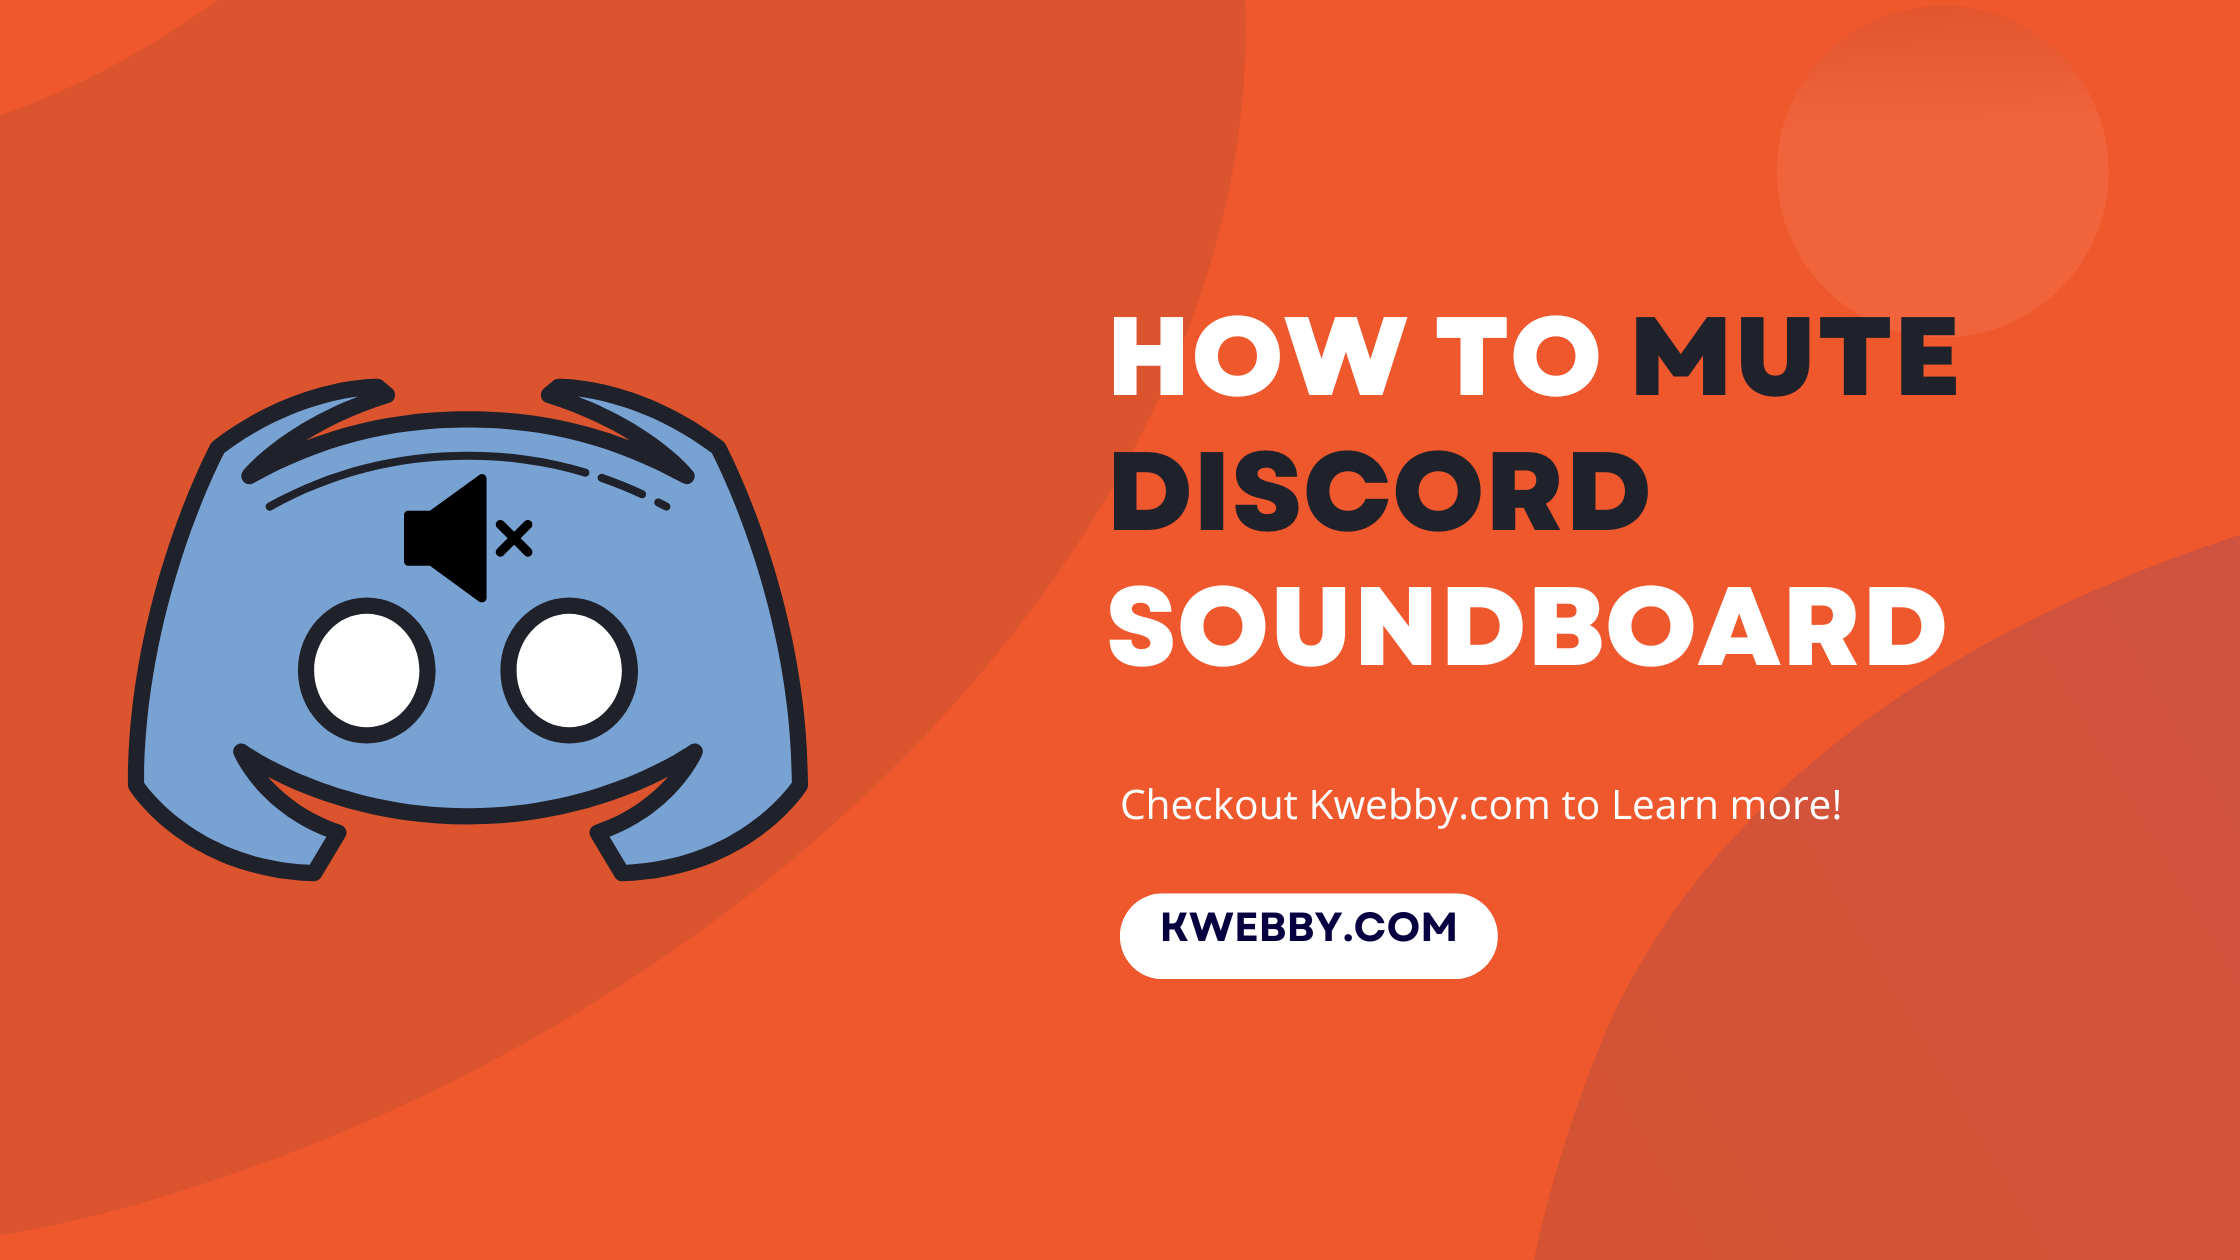 How to mute discord soundboard in 2 Clicks